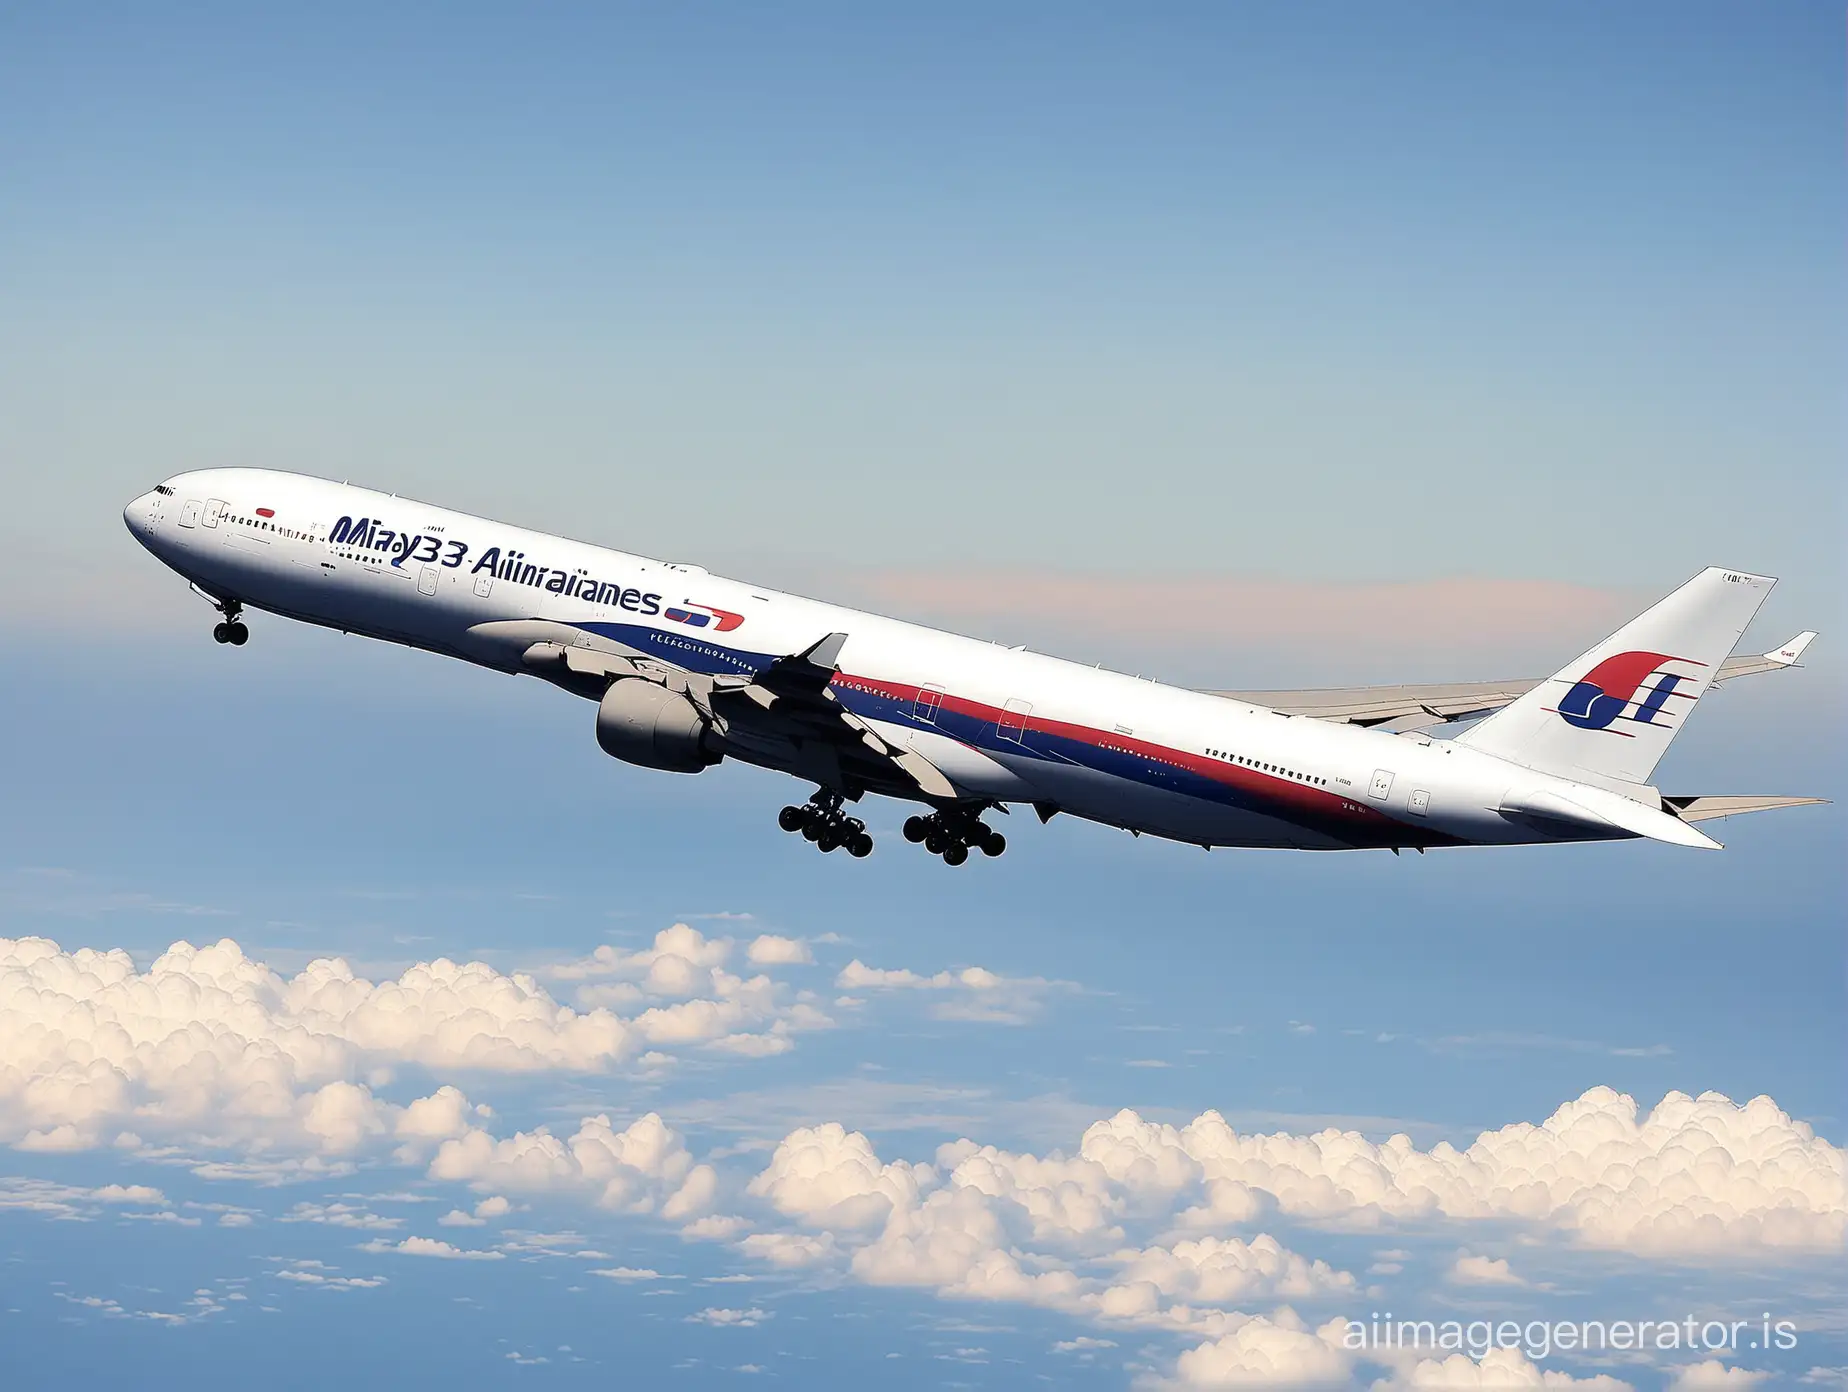 Mystery-Surrounding-Malaysia-Airlines-Flight-MH370-Disappearance